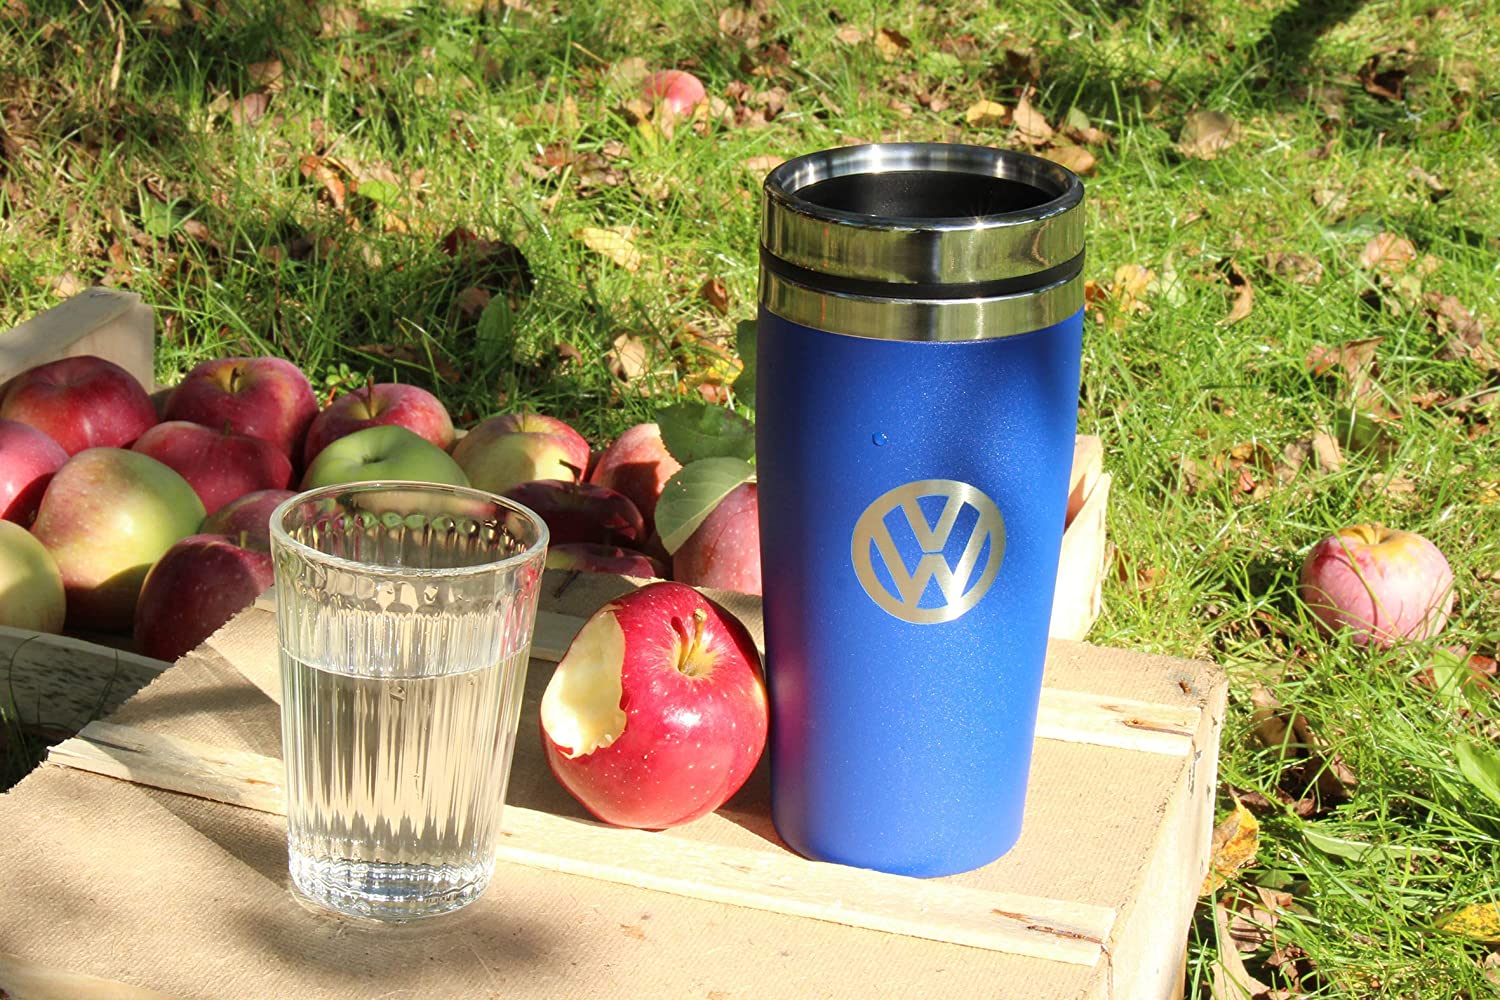 https://www.wideopencountry.com/wp-content/uploads/sites/4/eats/2019/06/BRISA-VW-Collection-Volkswagen-Samba-Bus-T1-Camper-Van-Insulated-Stainless-Steel-Tumbler-Thermo-Mug-Double-Walled13.5-fl.oz_.Blue-.jpg?resize=1500%2C1000